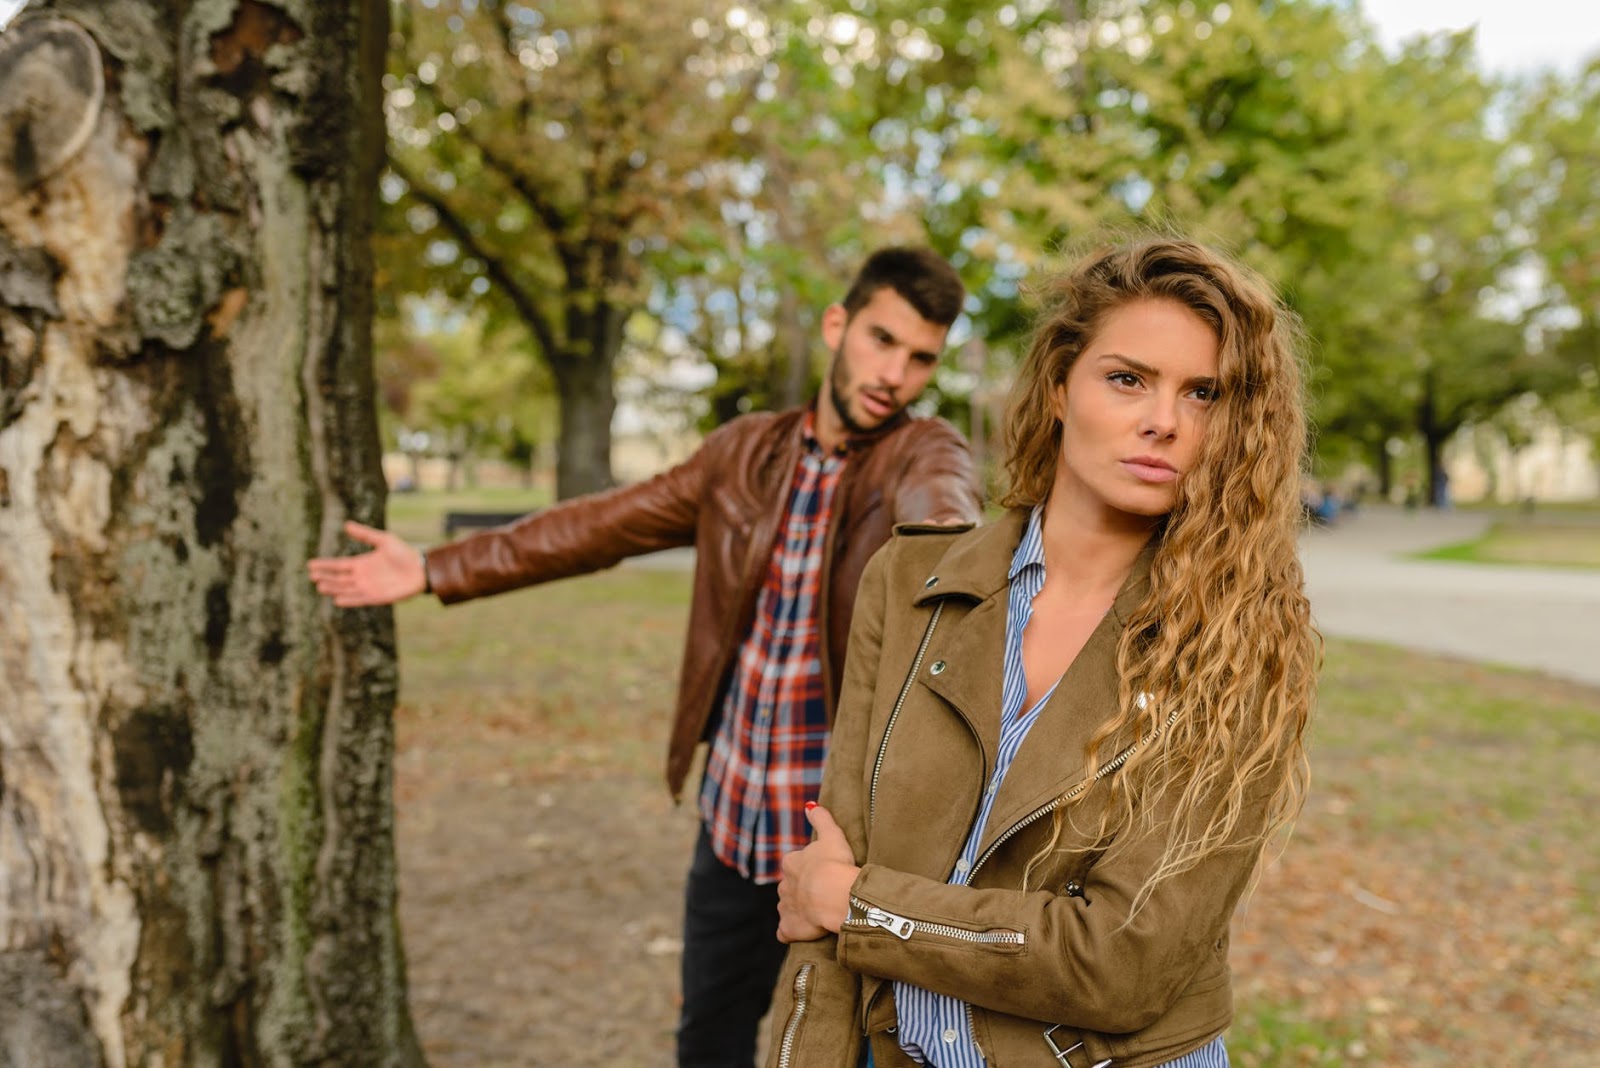 A man and a woman stand by a tree in the park while in a confrontation